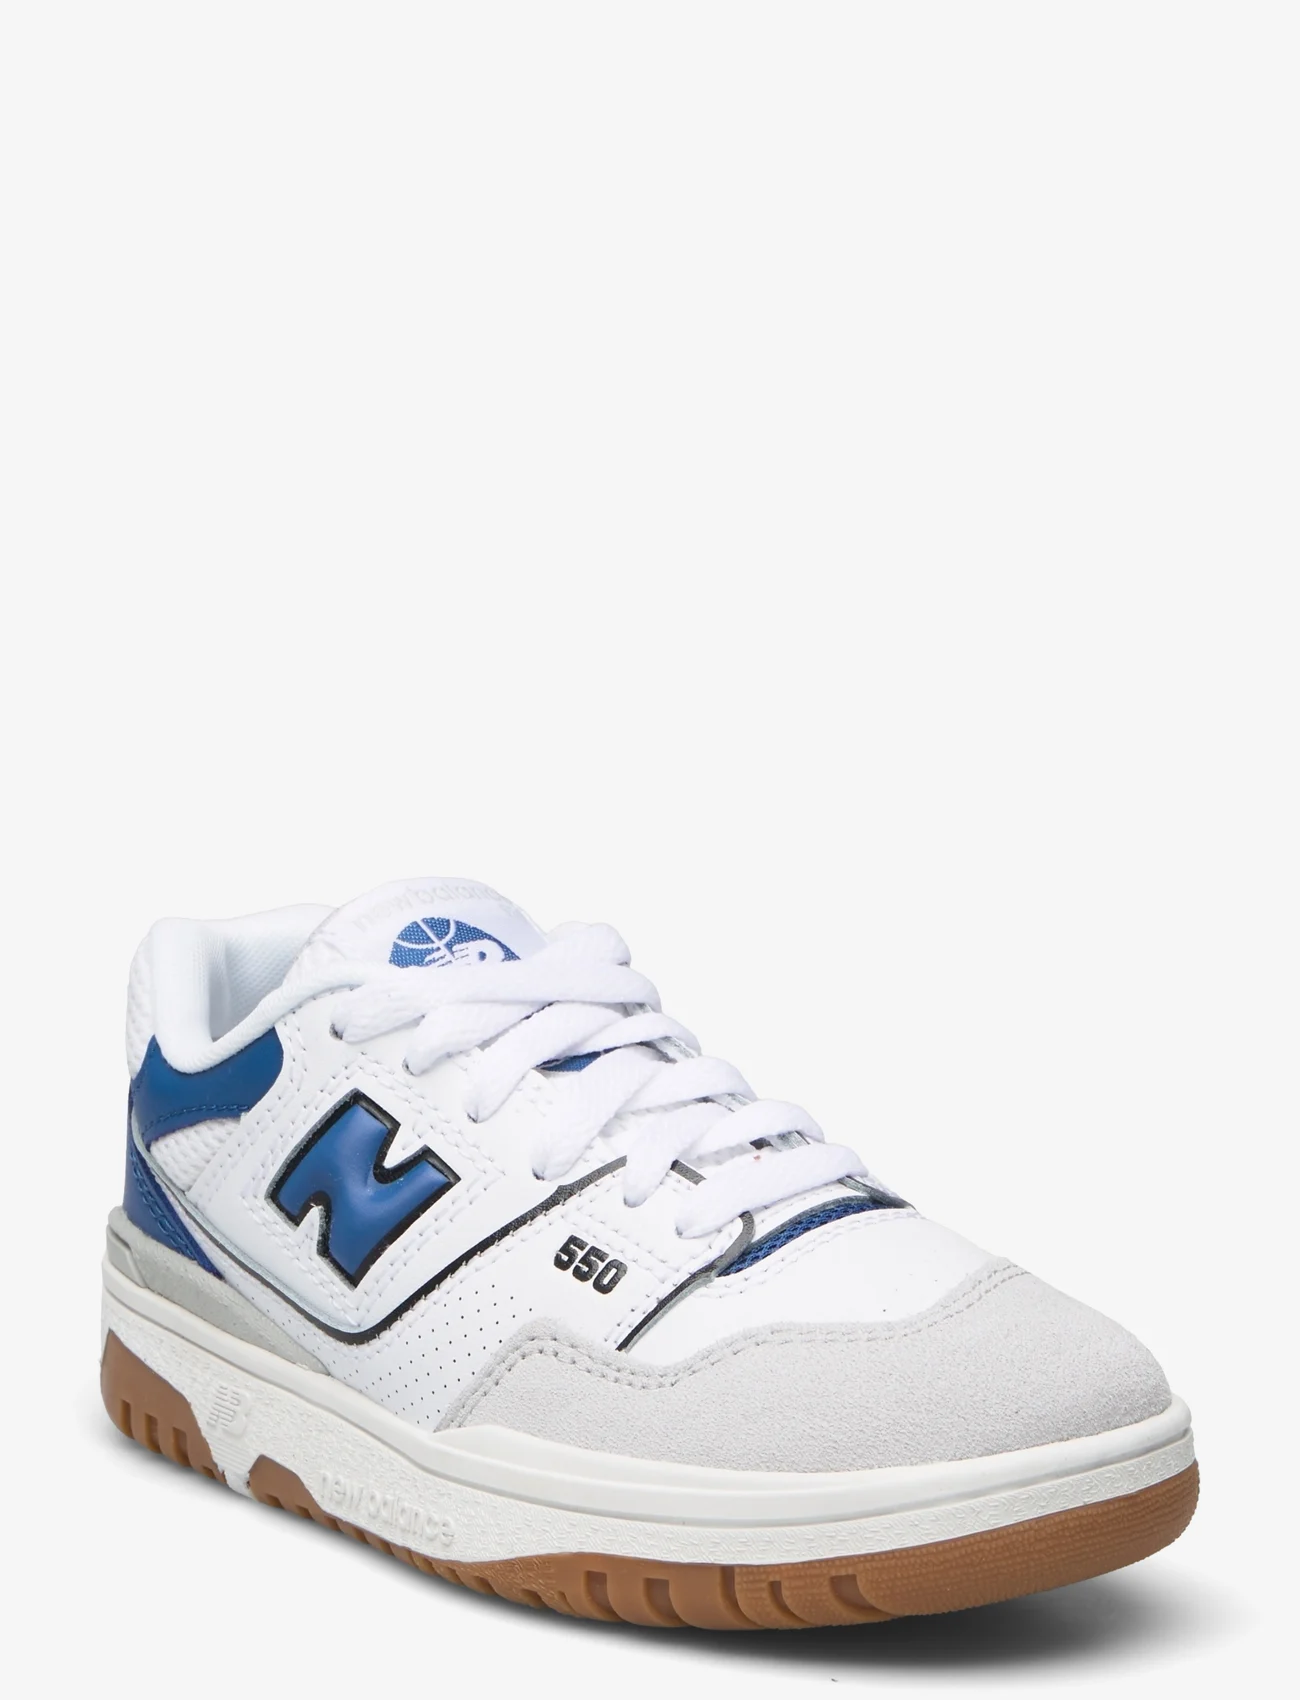 New Balance - New Balance BB550 Kids Bungee Lace - low-top sneakers - brighton grey - 0